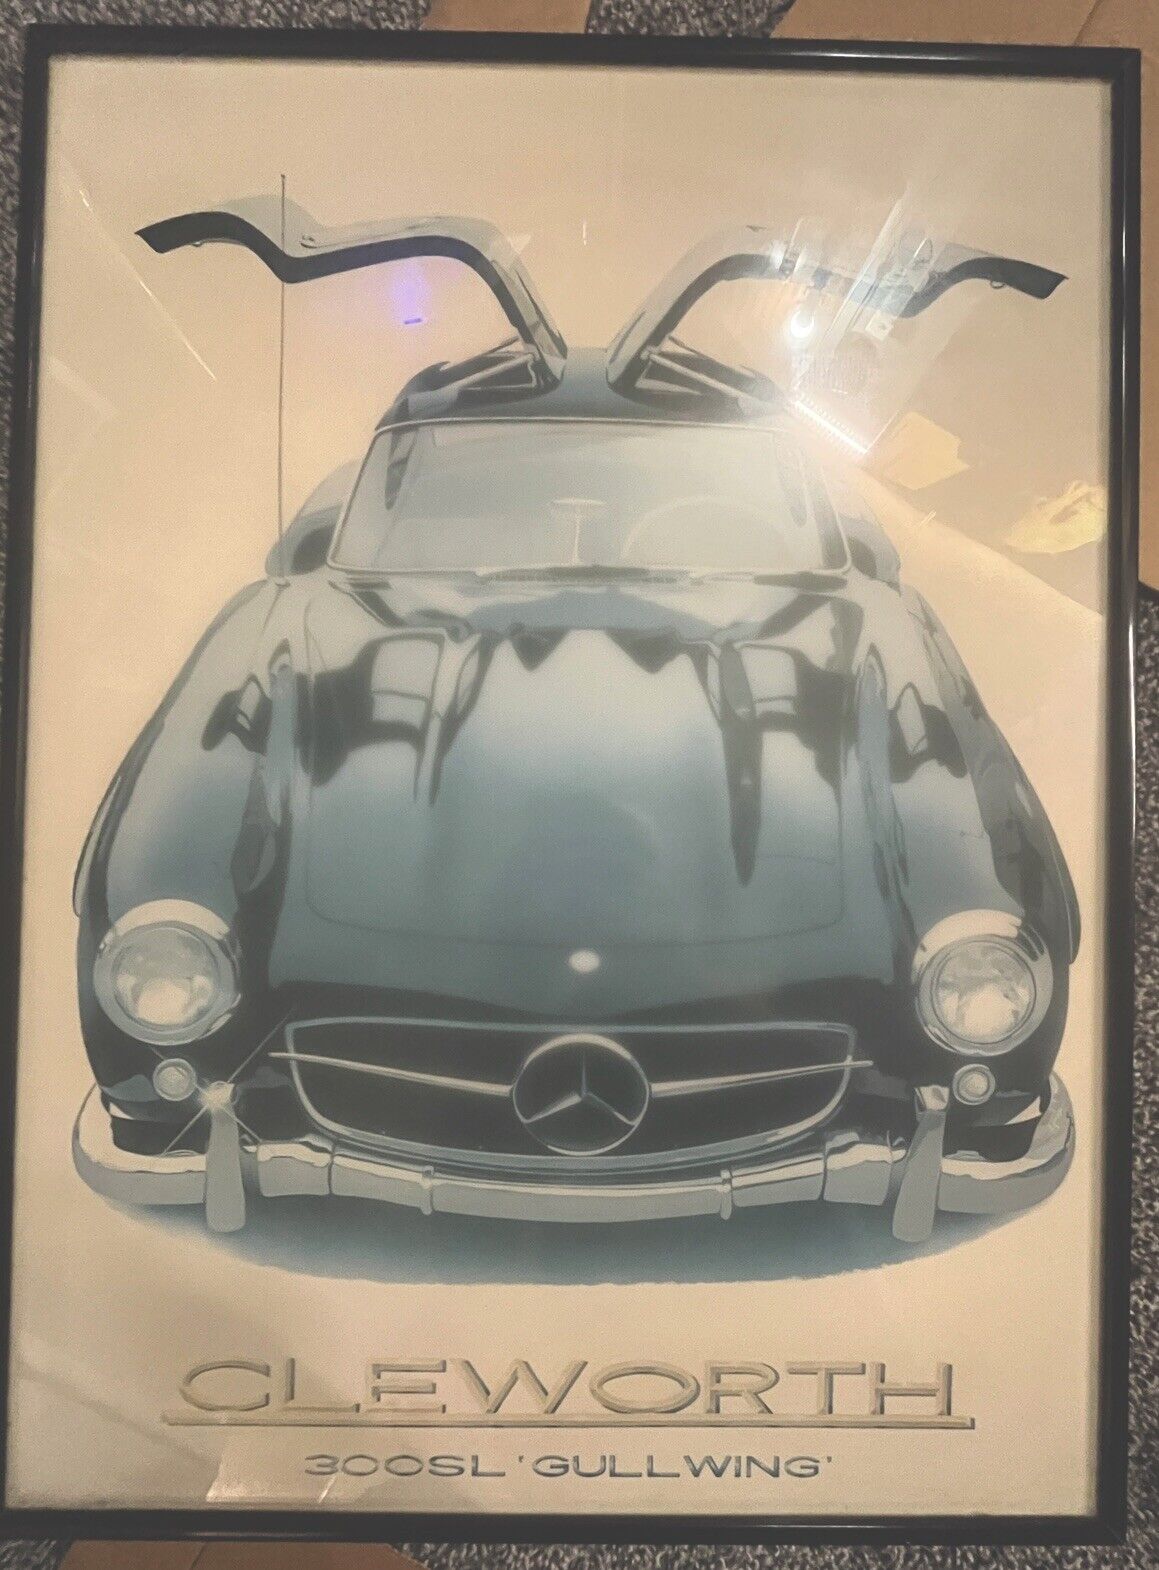 Mercedes-Benz 300SL Gullwing Harold Cleworth AFAS Poster Art Print 